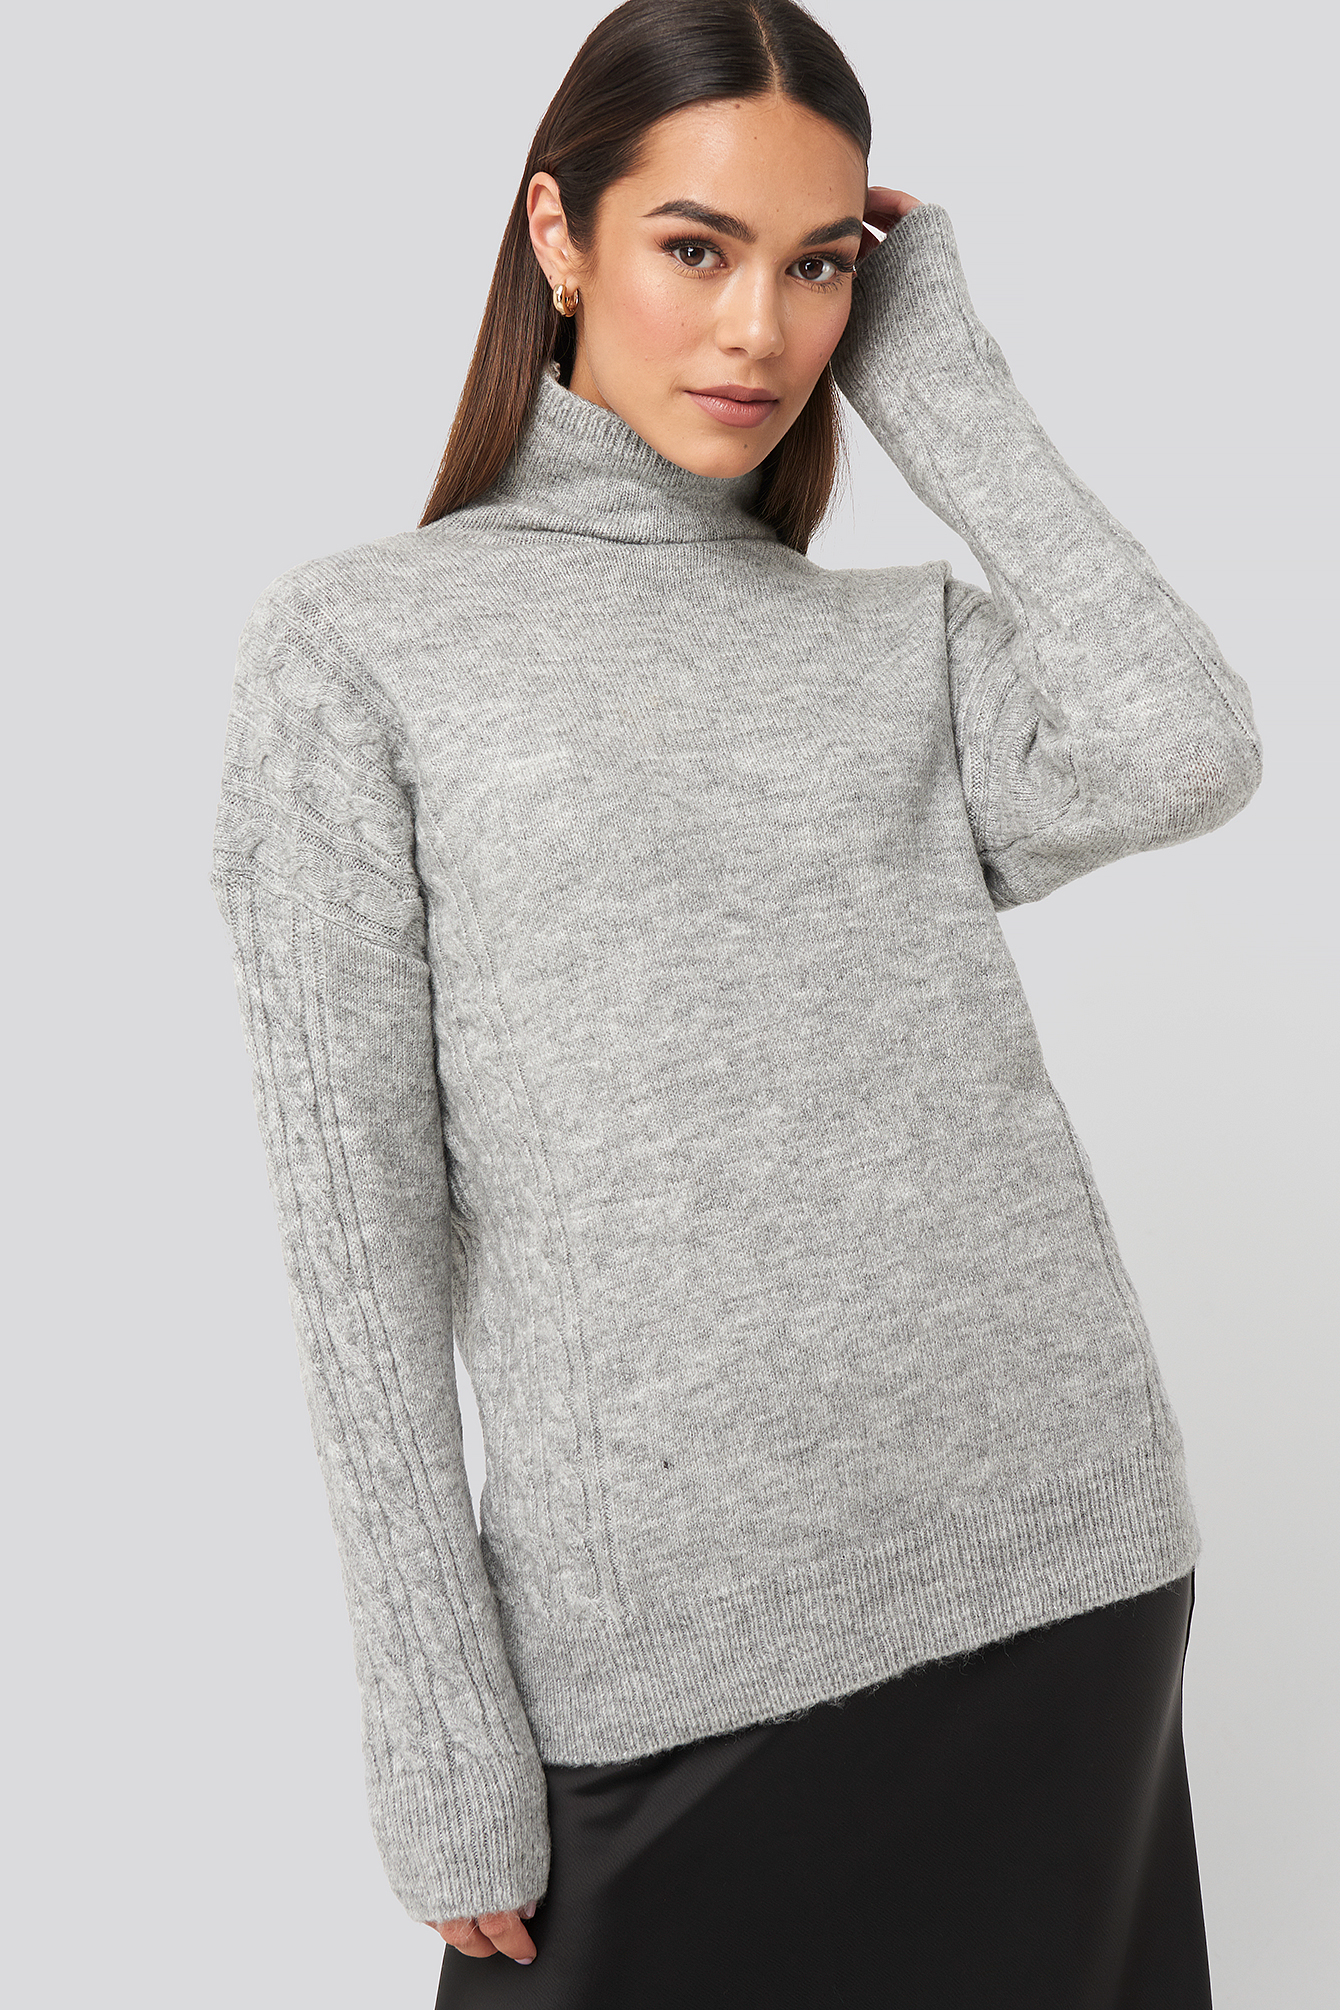 Gray Turtleneck Sleeve Detailed Knitted Sweater